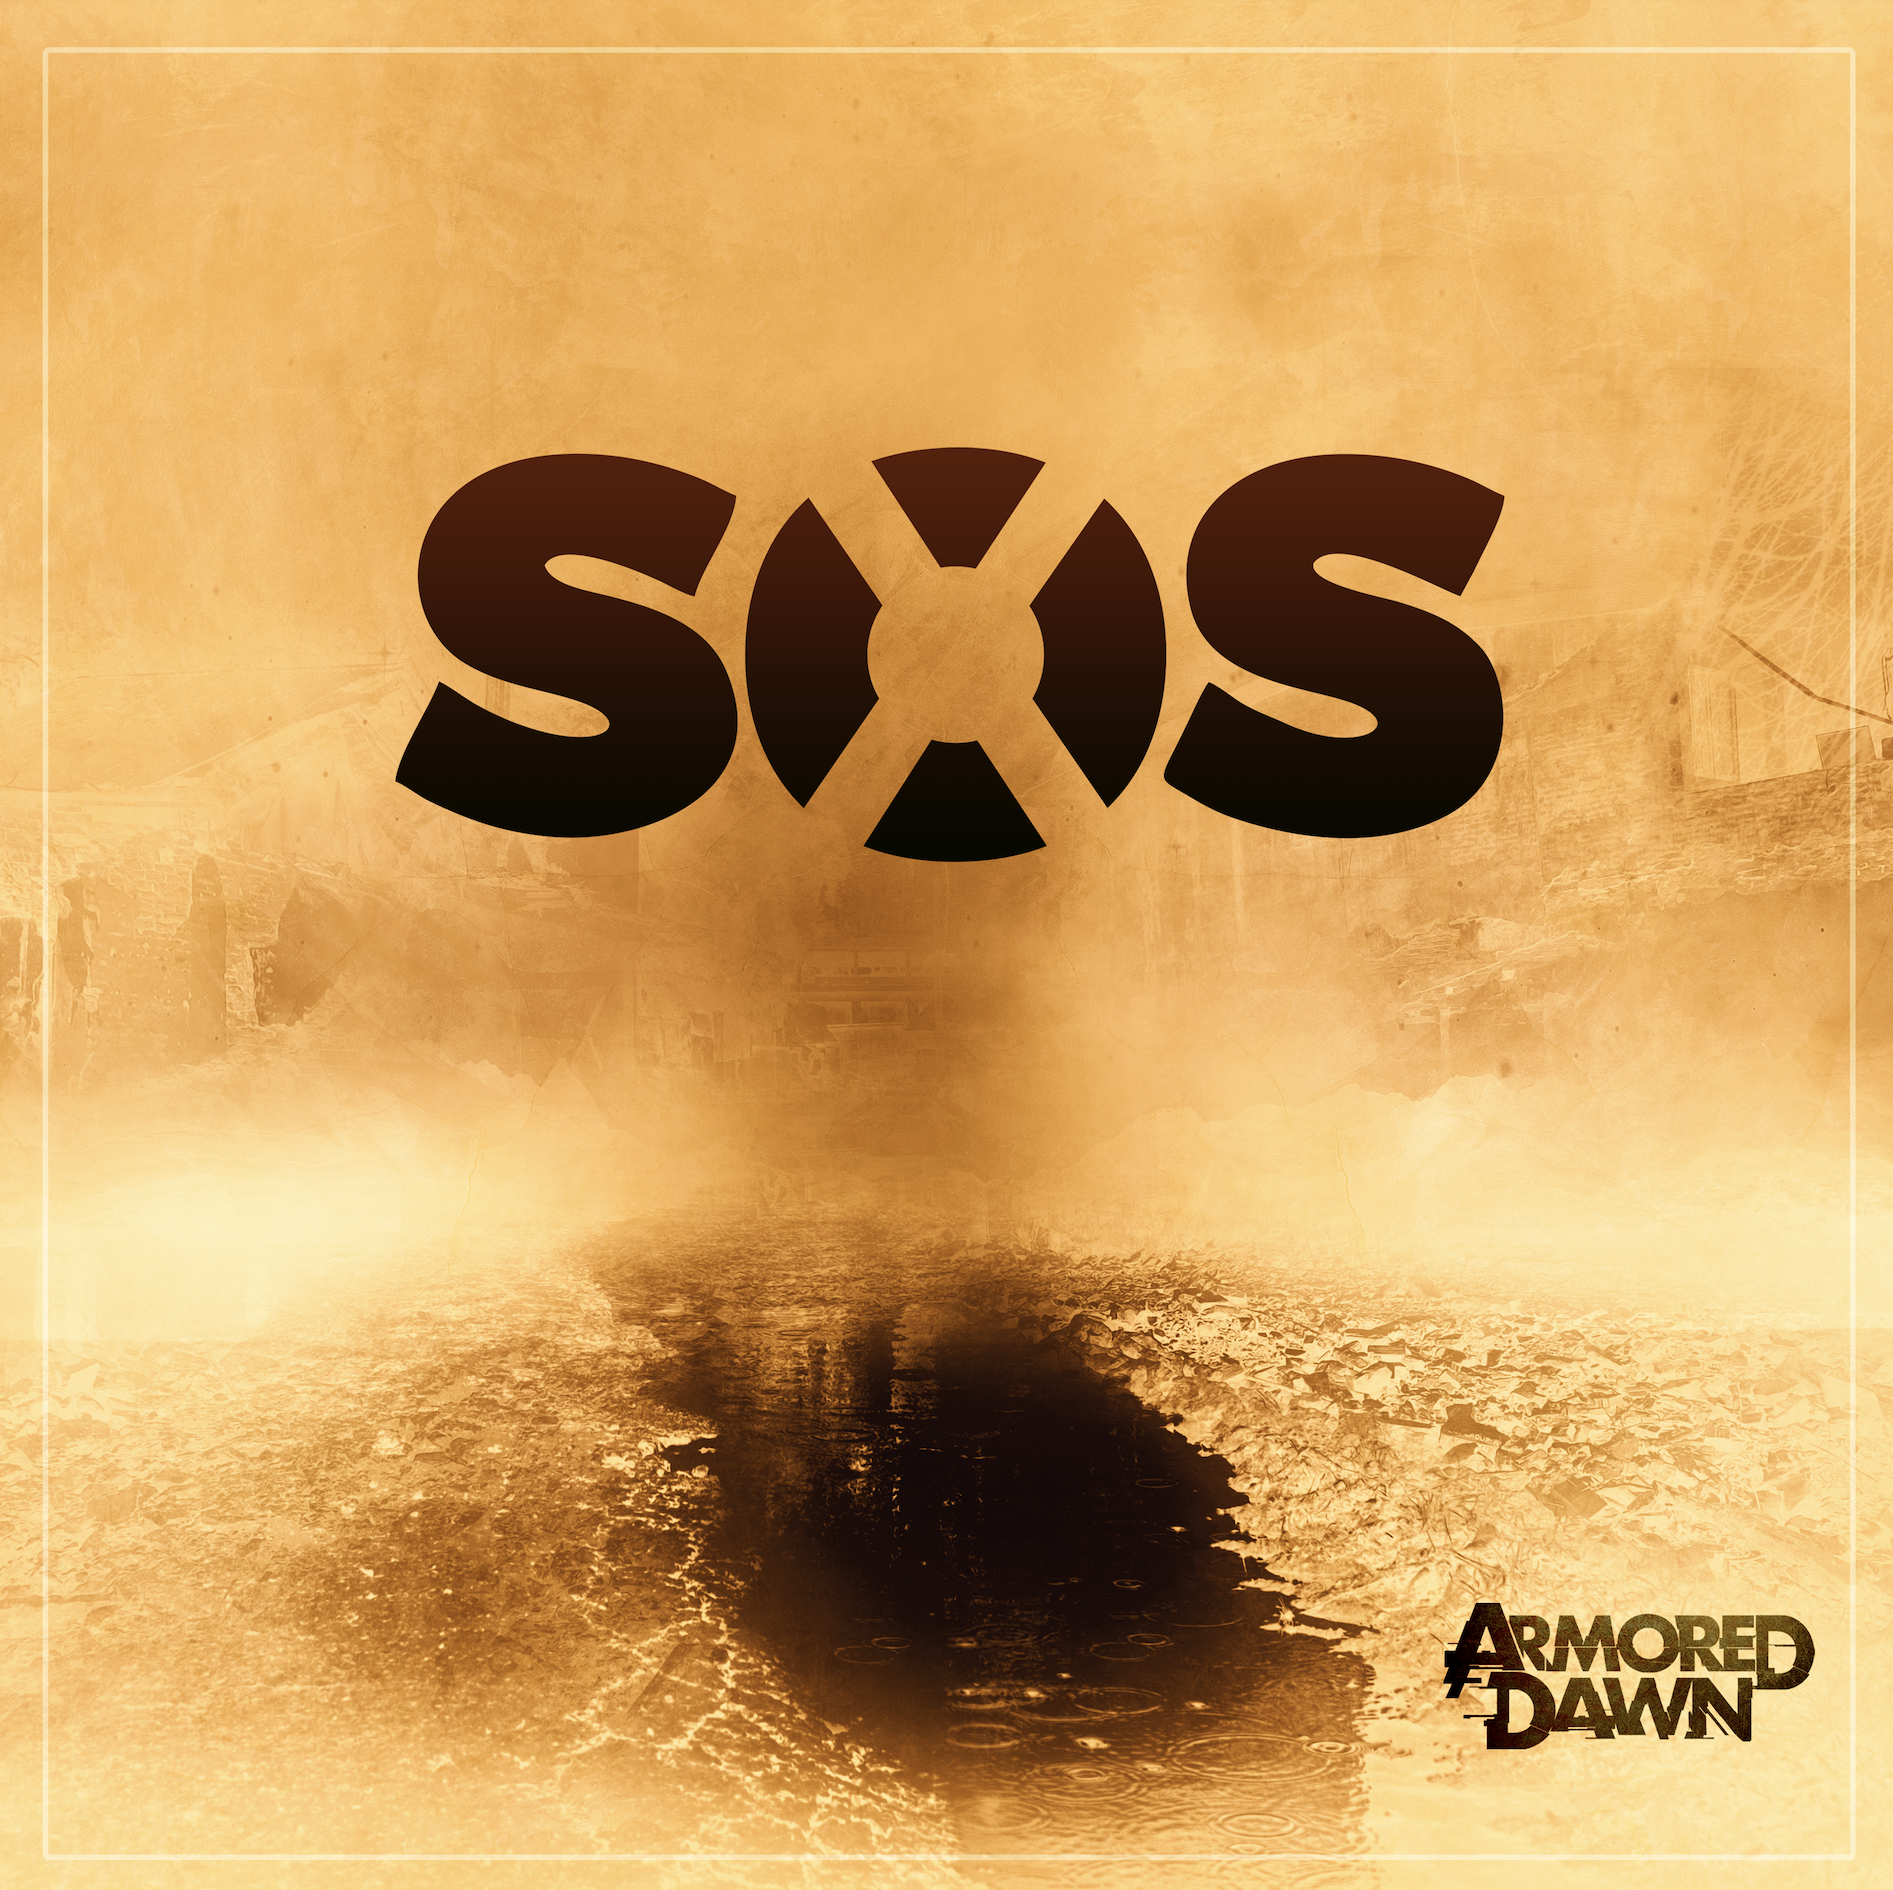 Bringing their rocking sound to Africa, the new single ‘S.O.S’ from ‘Armored Dawn’ with it’s sonic, driving and powerful wall of sound production is on the playlist now.